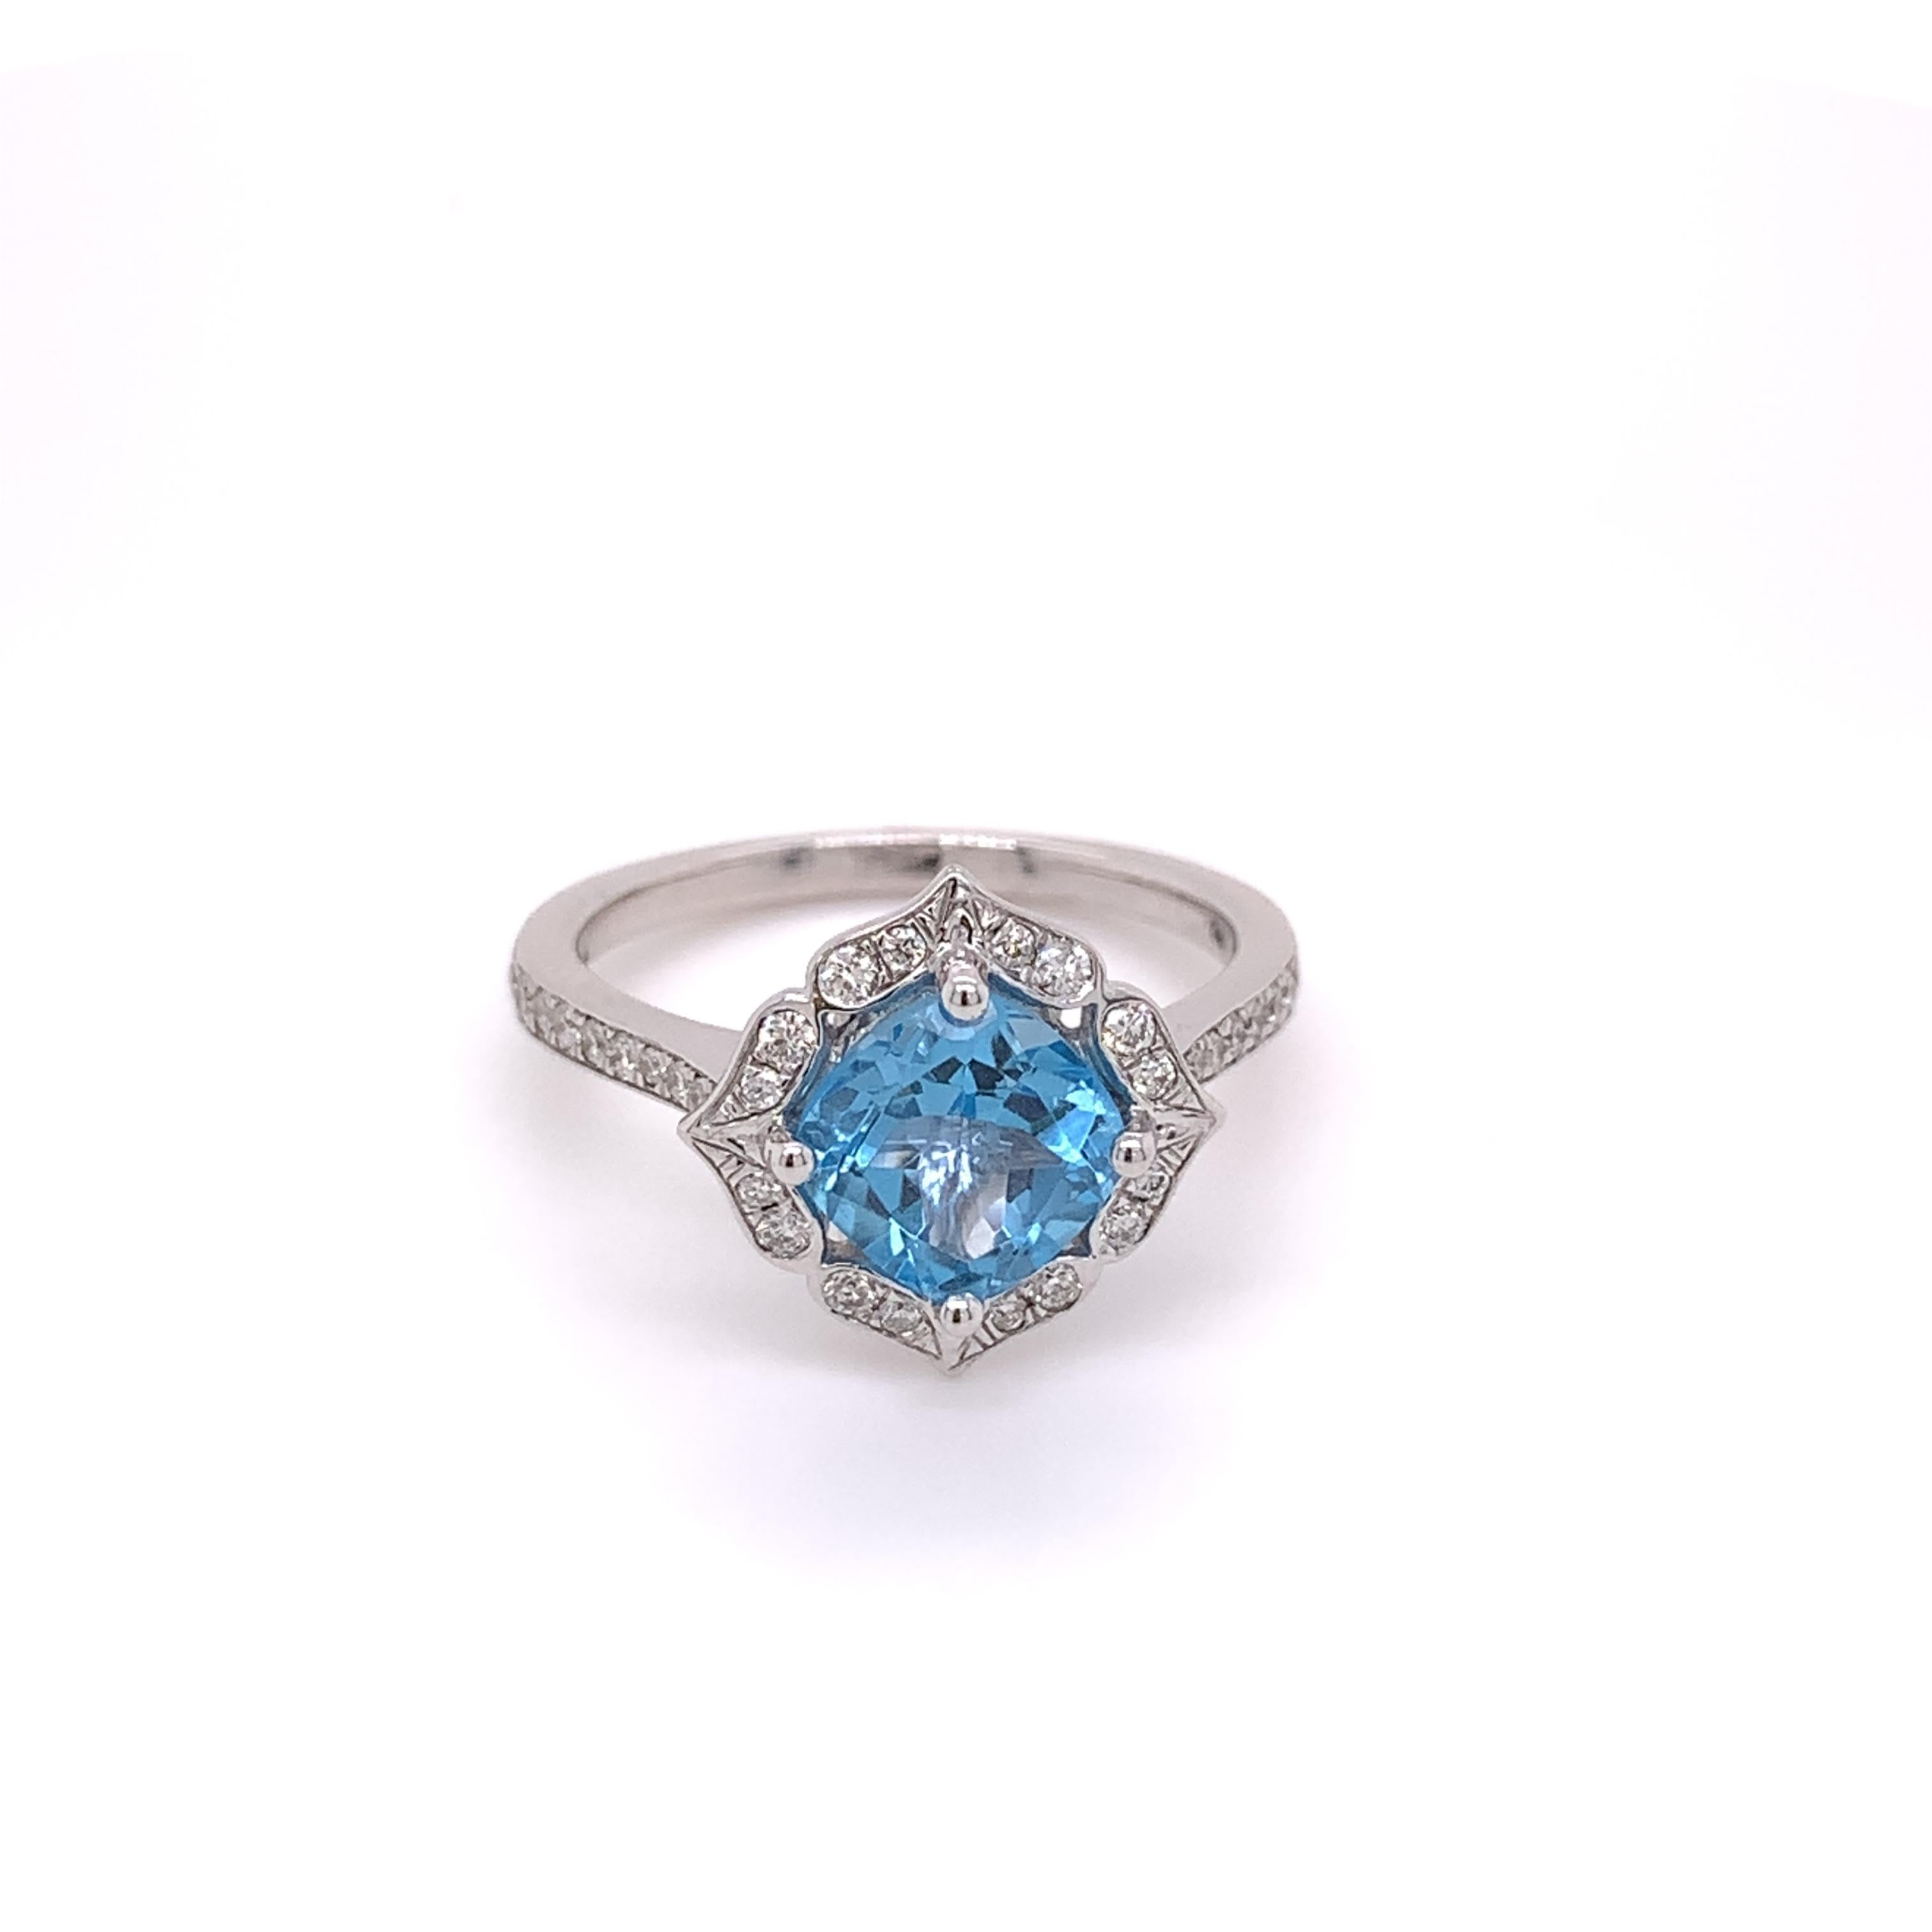 This ring weighs was crafted in 14 karat white gold. It has a natural 1.37 carat cushion cut blue topaz measuring 7.00 x 7.00 x 4.50mm. This ring also contains 36 natural round brilliant diamonds weighing approximately 0.27 carats (H-I color, and I1